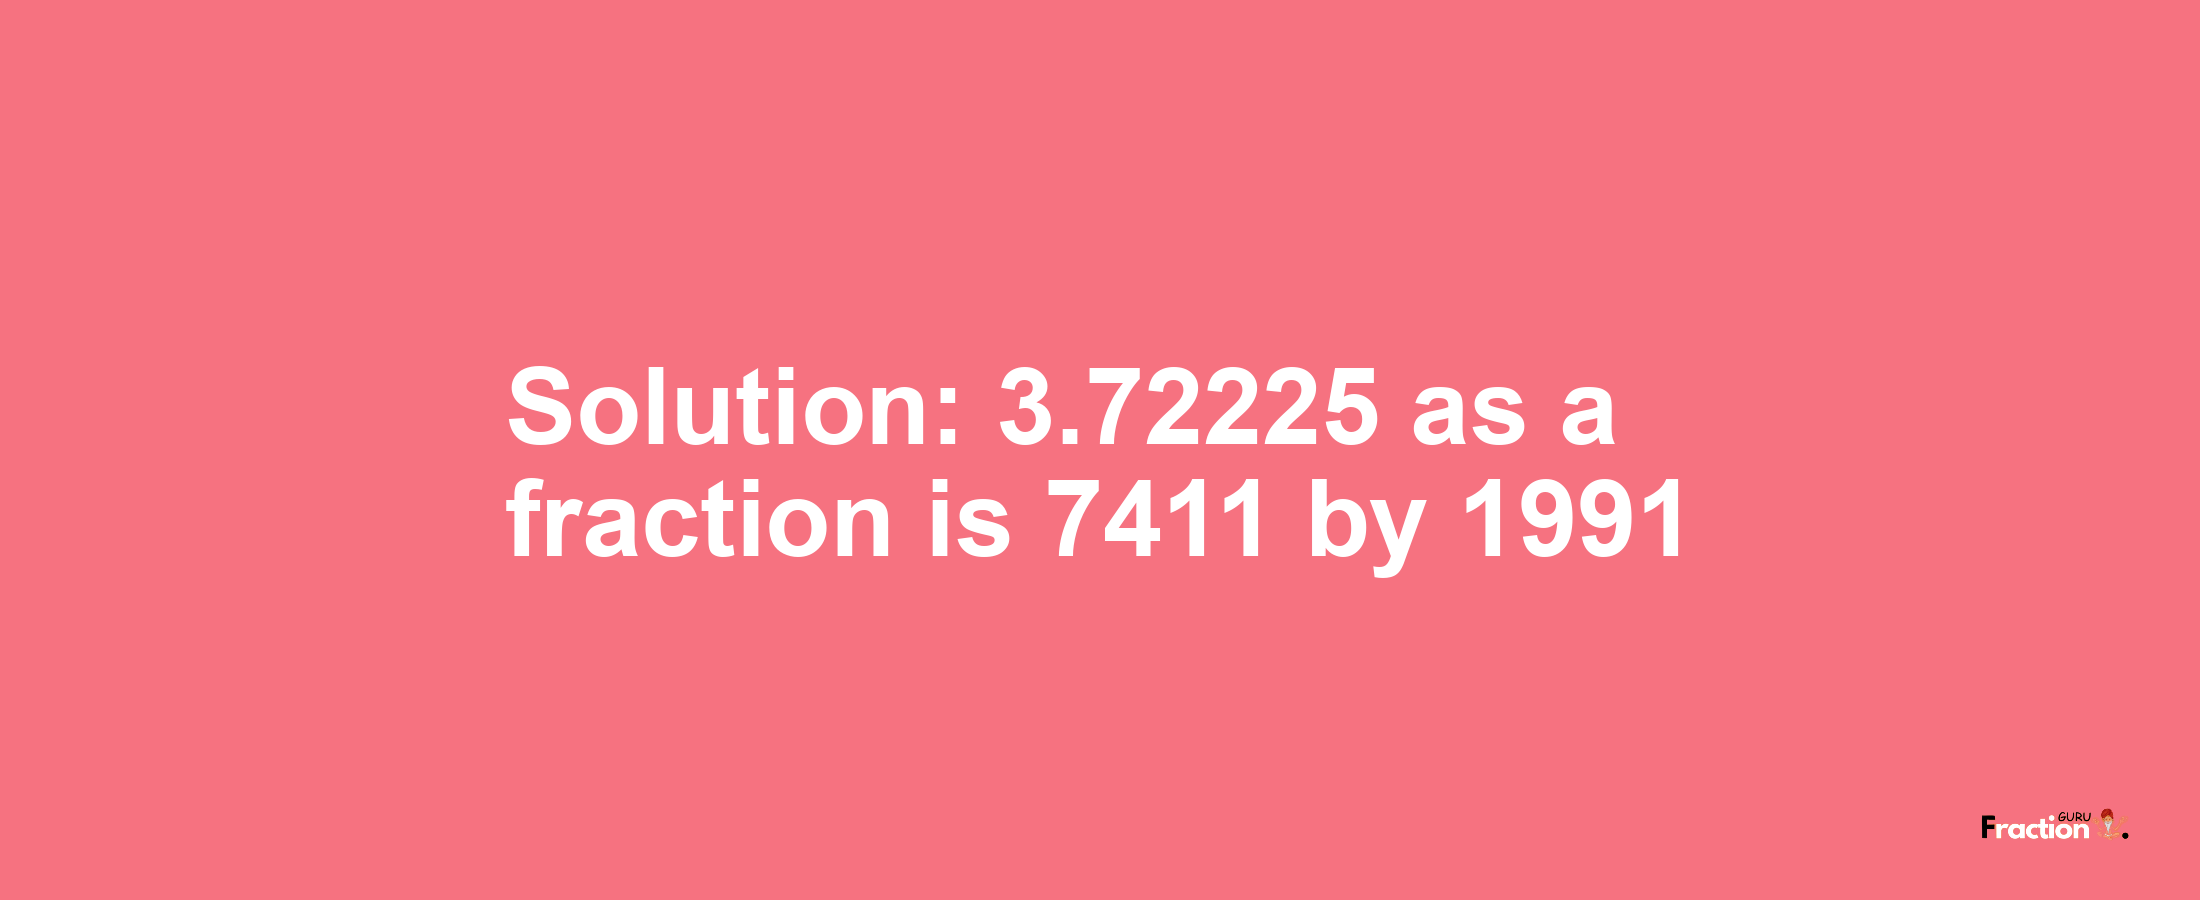 Solution:3.72225 as a fraction is 7411/1991